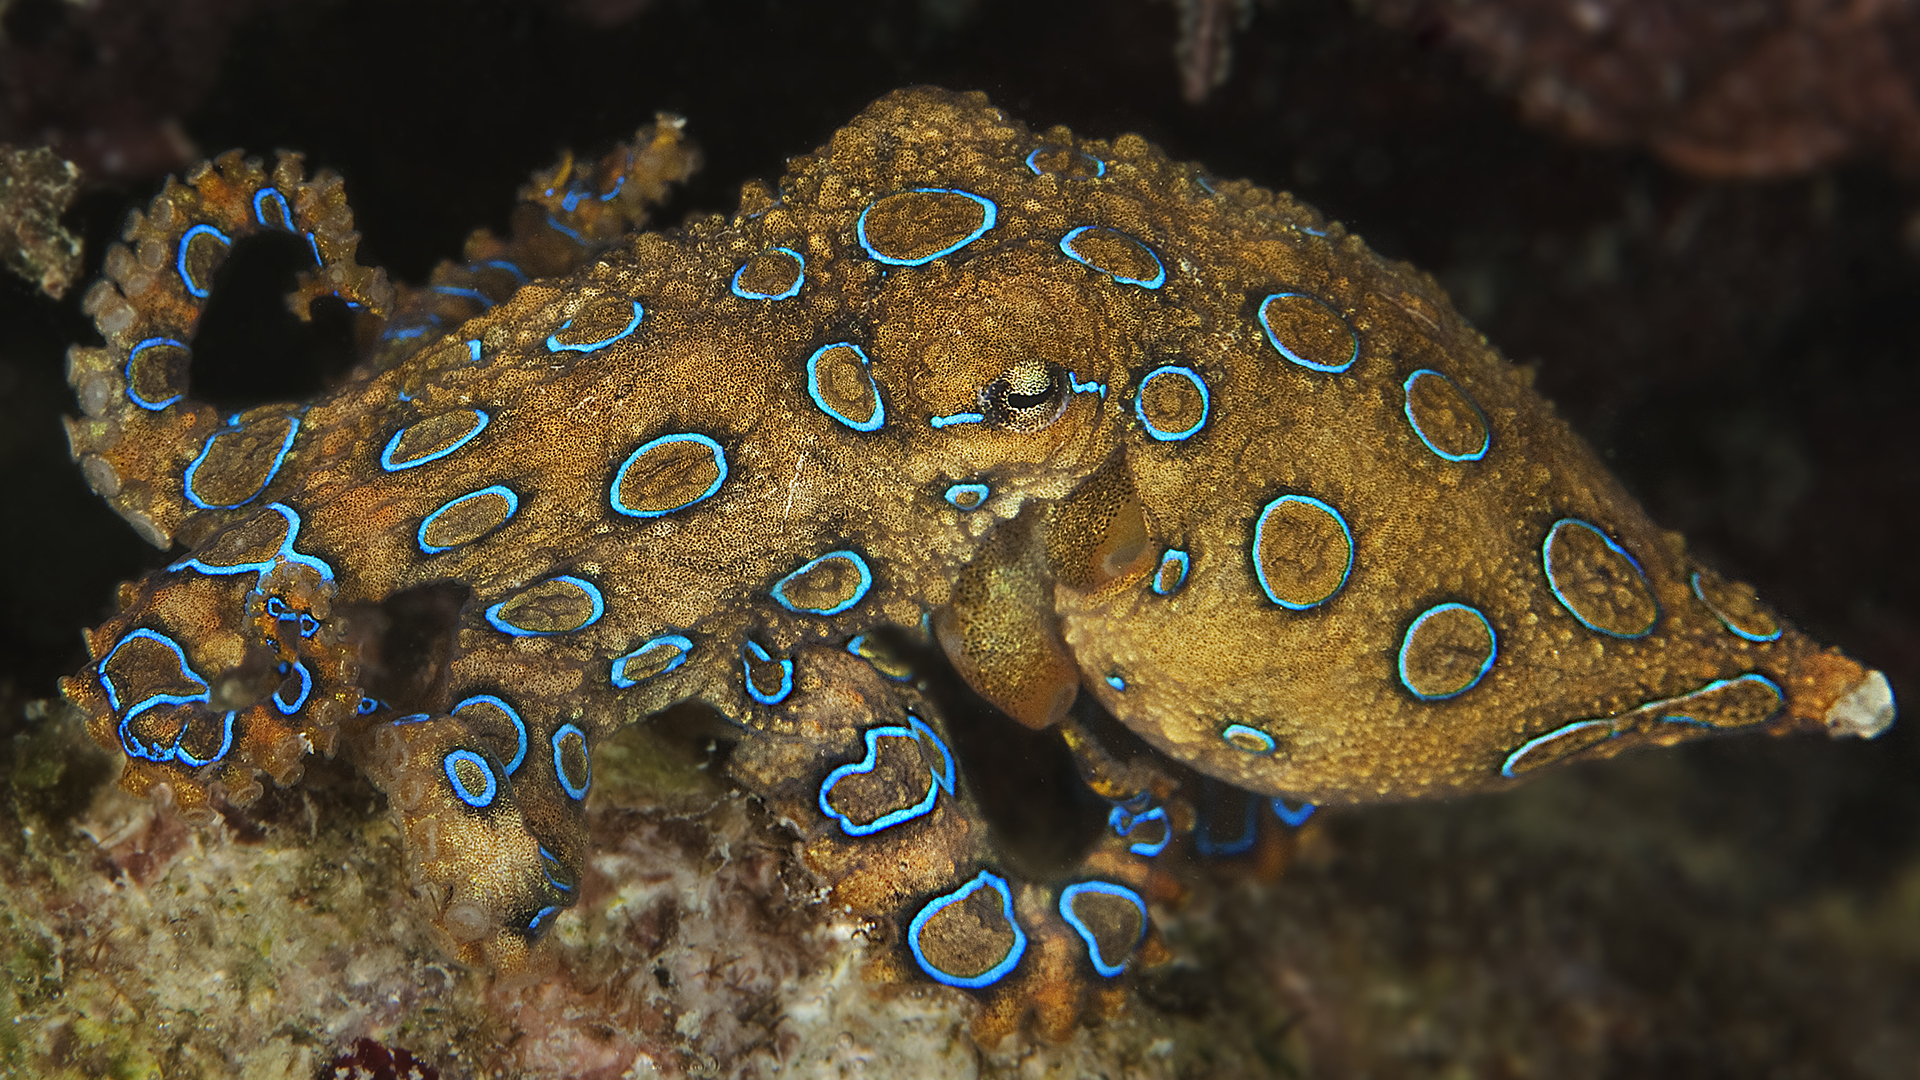 The highly venomous blue-ringed octopus.